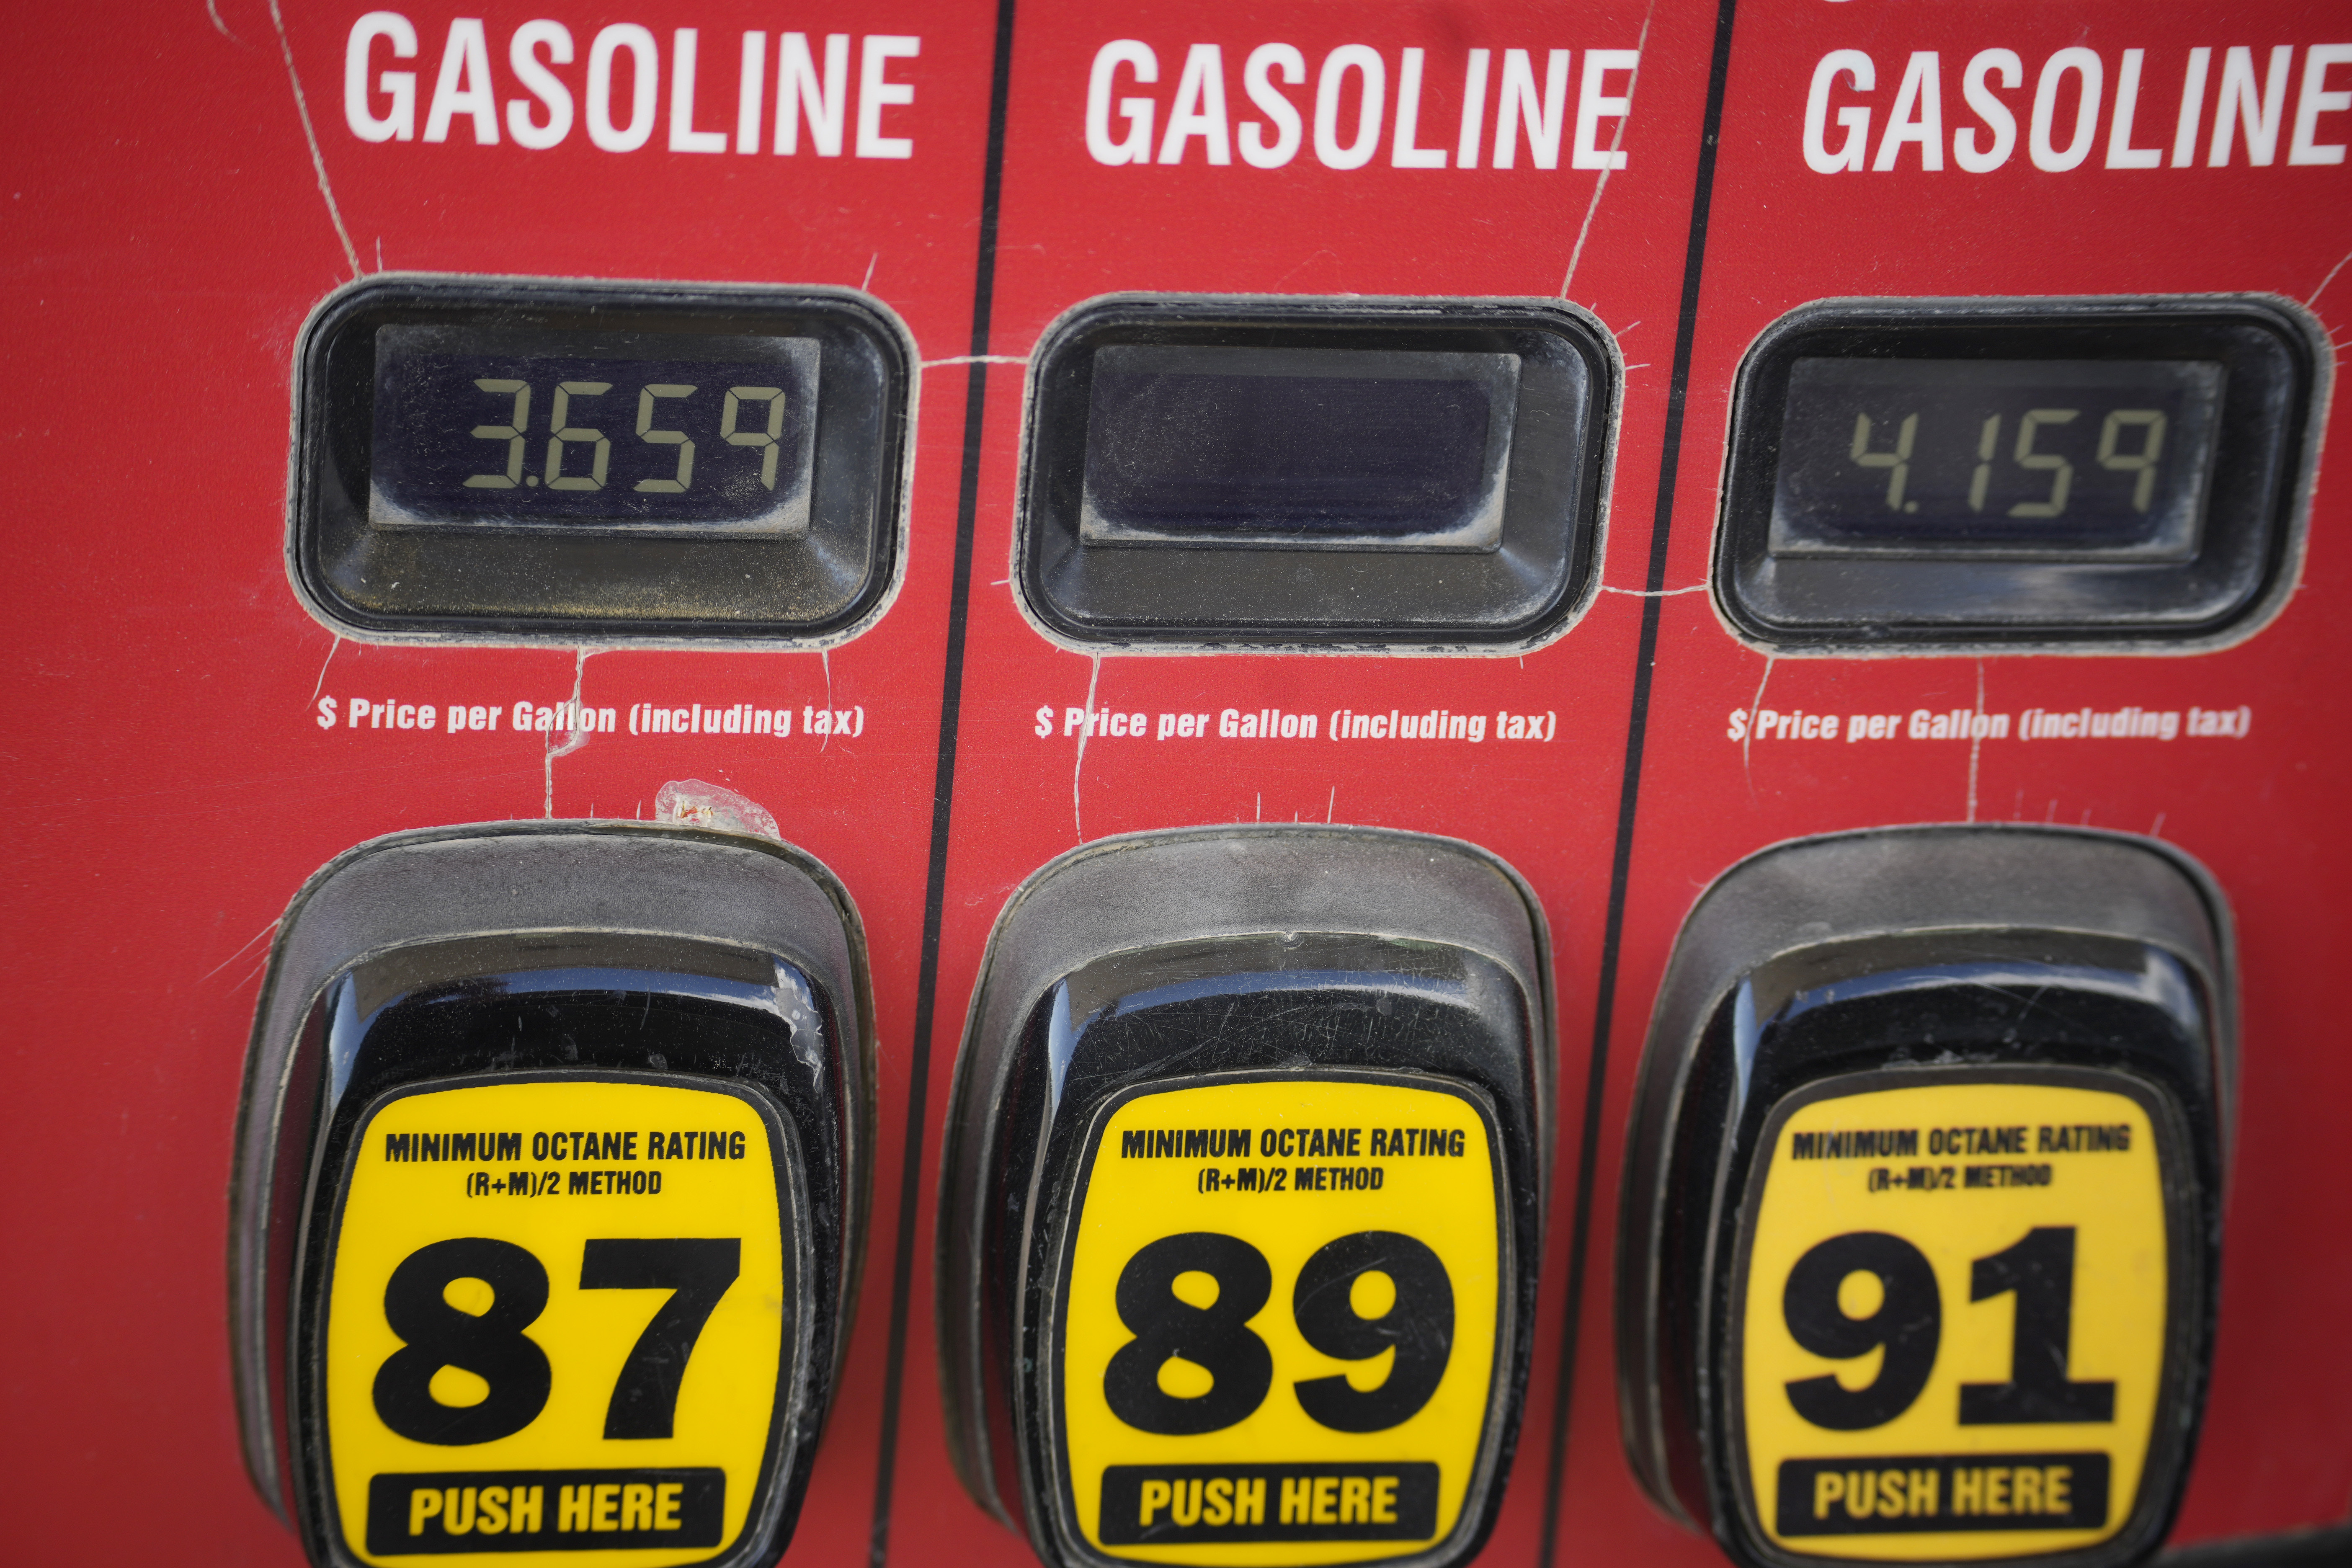 Oil prices have risen. That's making gas more expensive for US